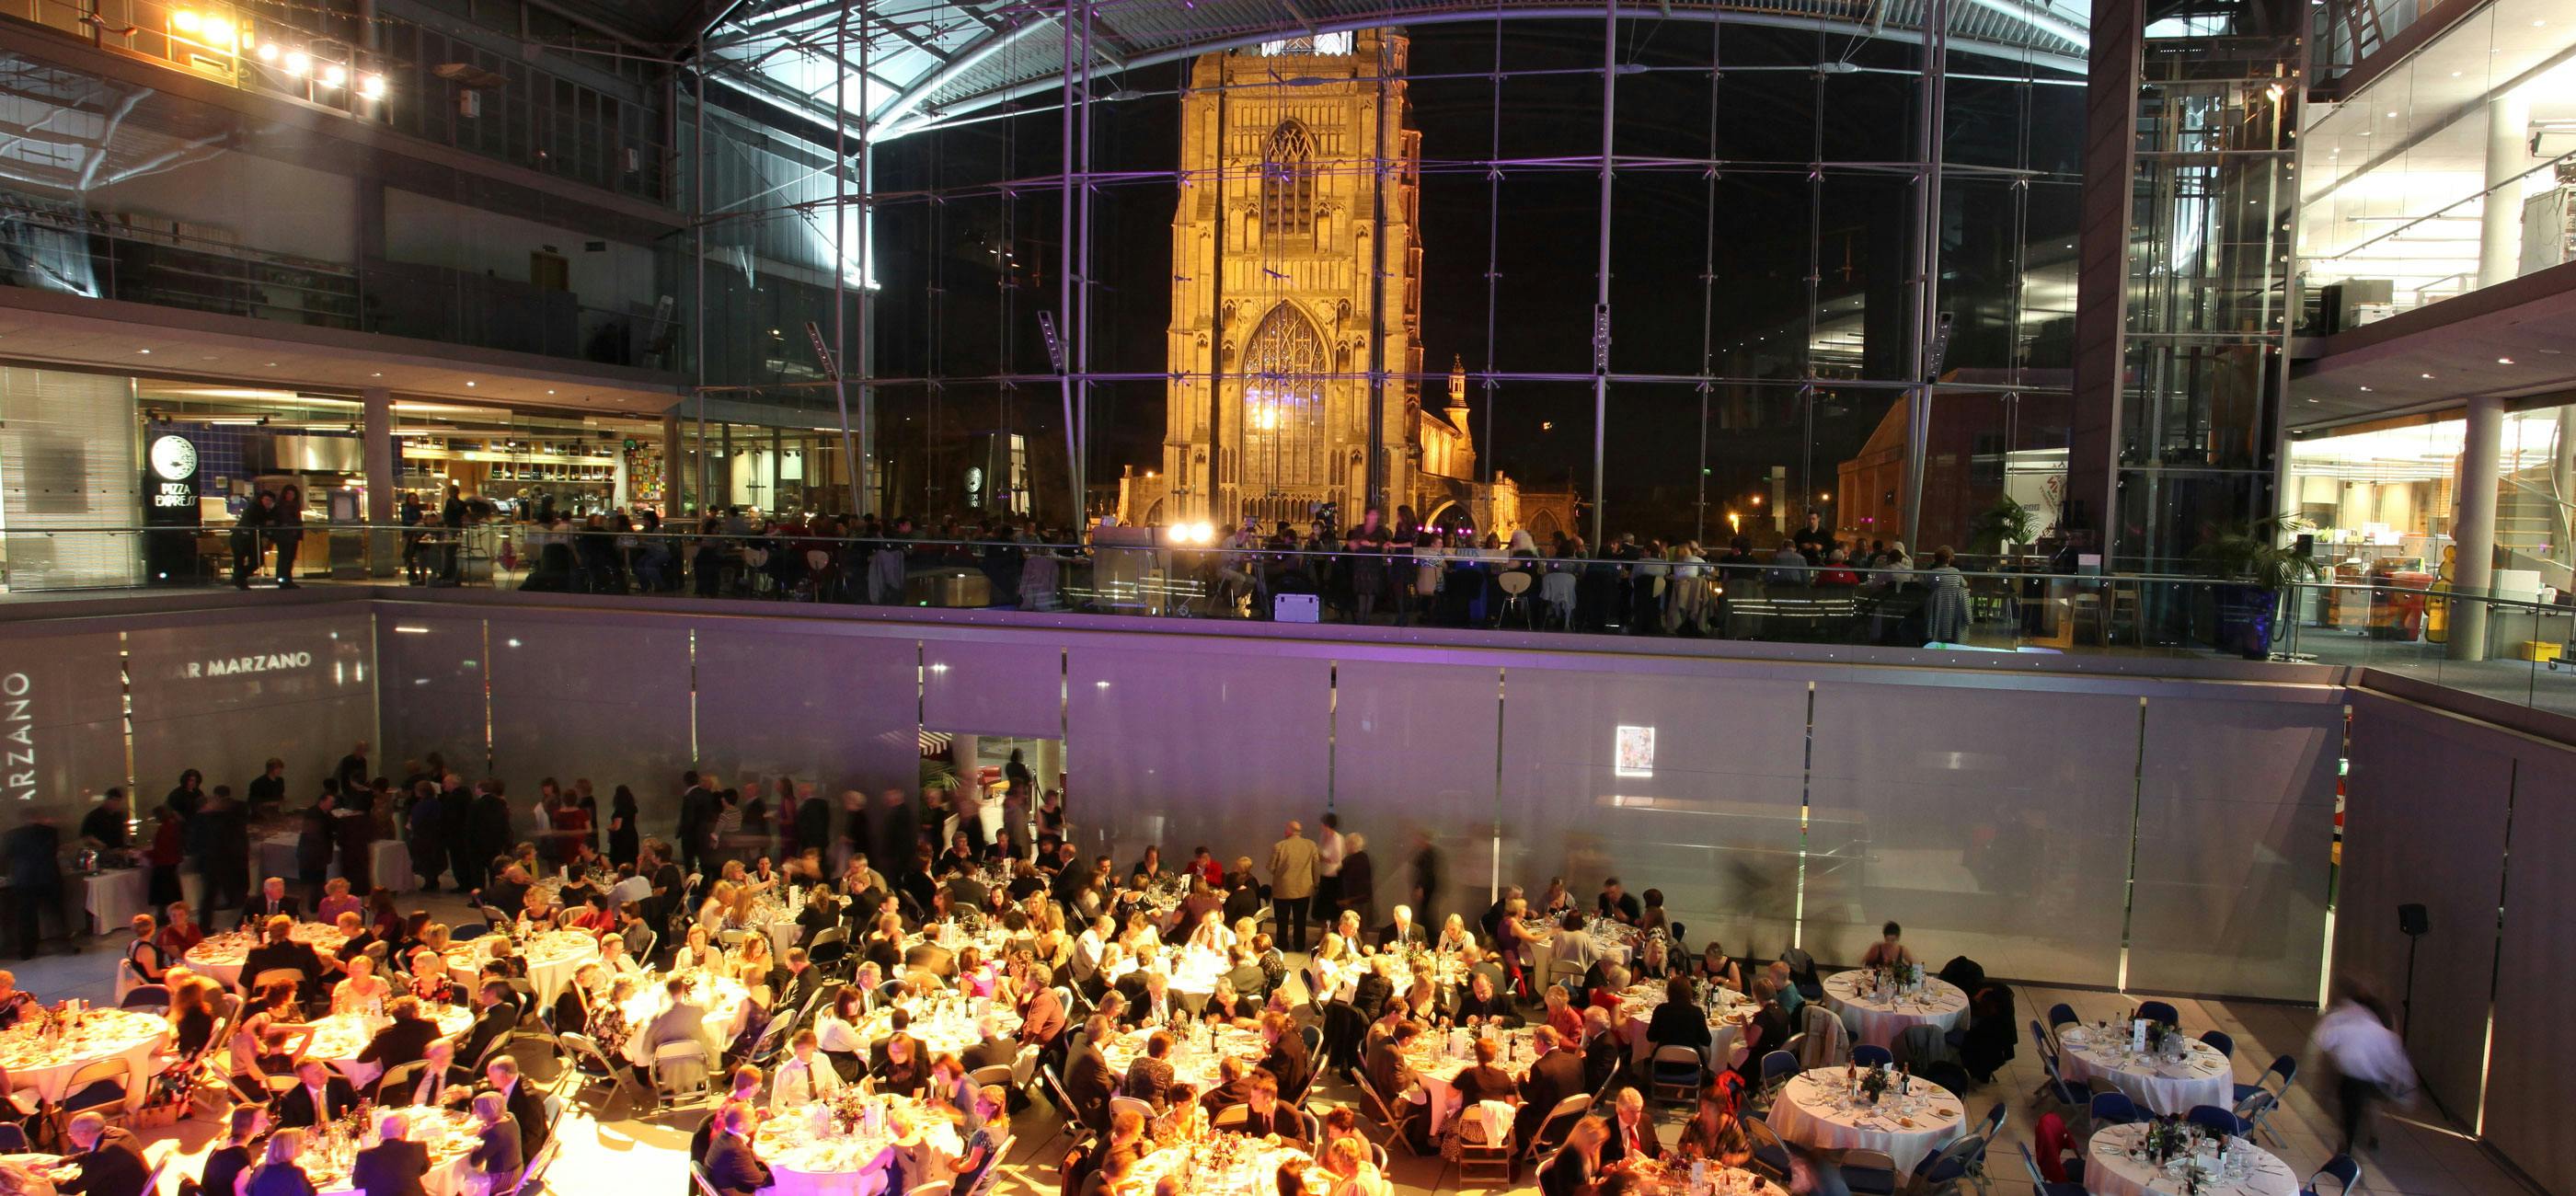 A formal event with tables in The Atrium of The Forum in the evening with St Peter Mancroft lit up outside.